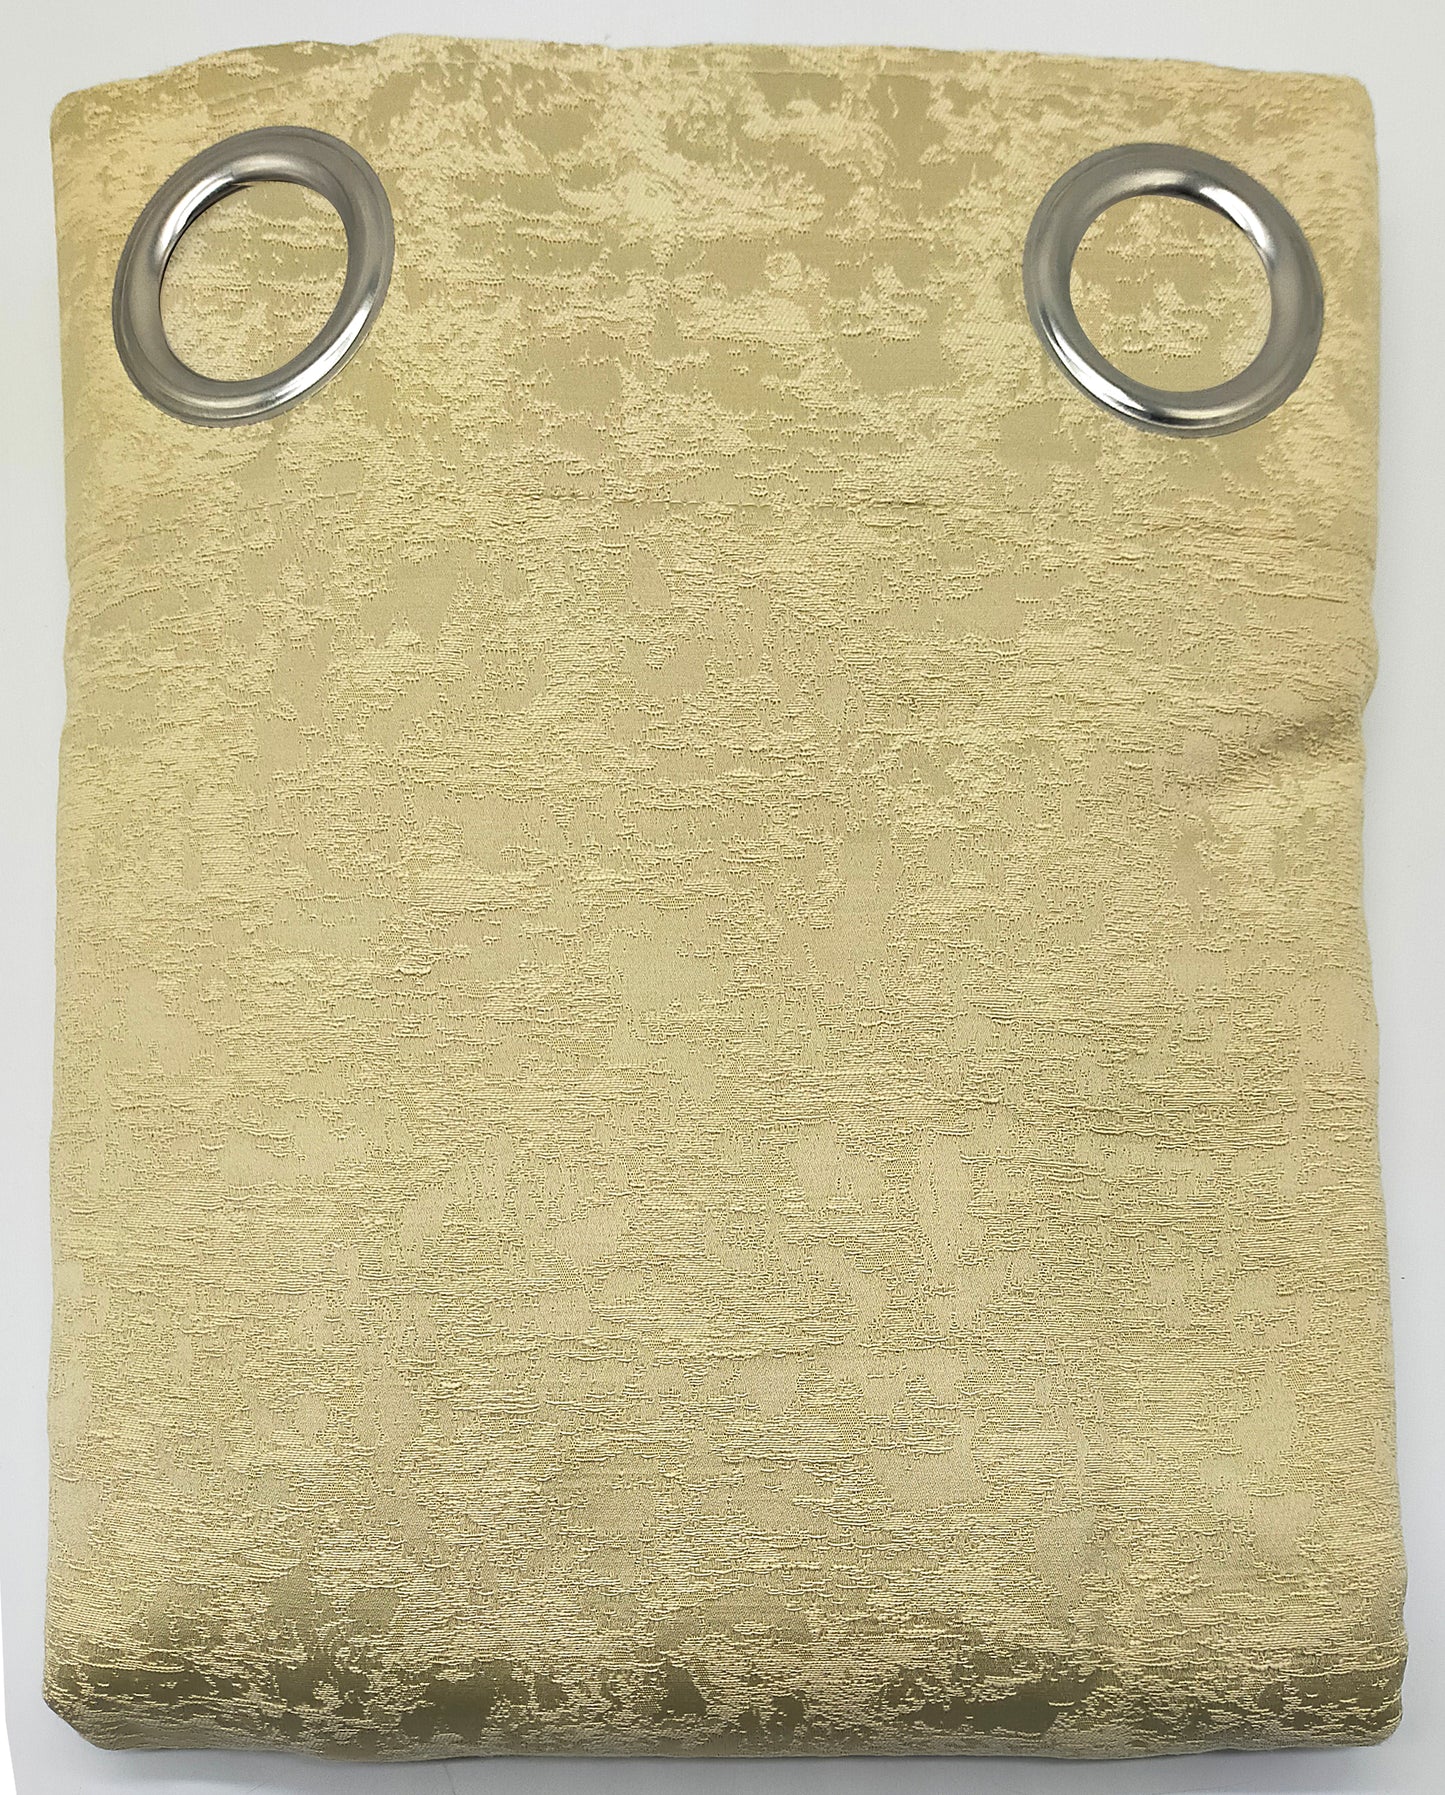 Colony Curtain with rings